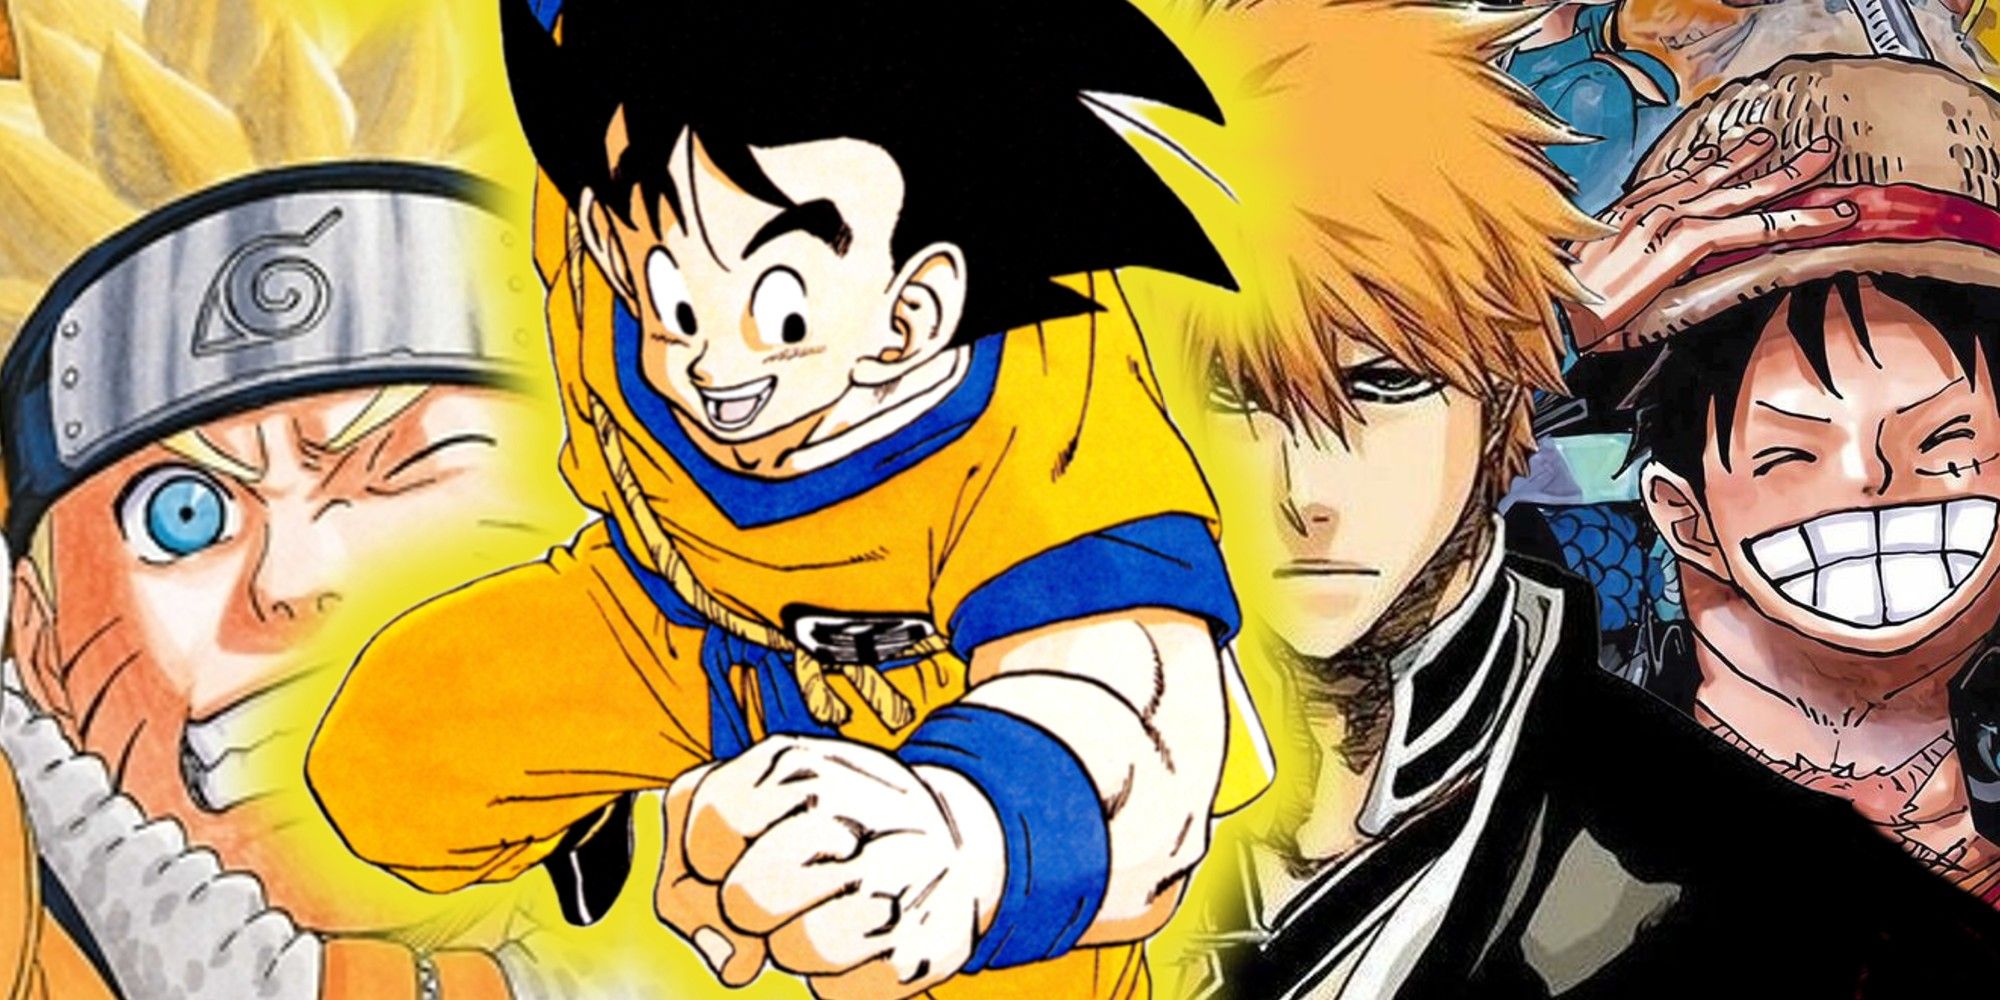 A collage-style Image featuring the official manga art of Naruto, Ichigo and Luffy with Goku in the middle